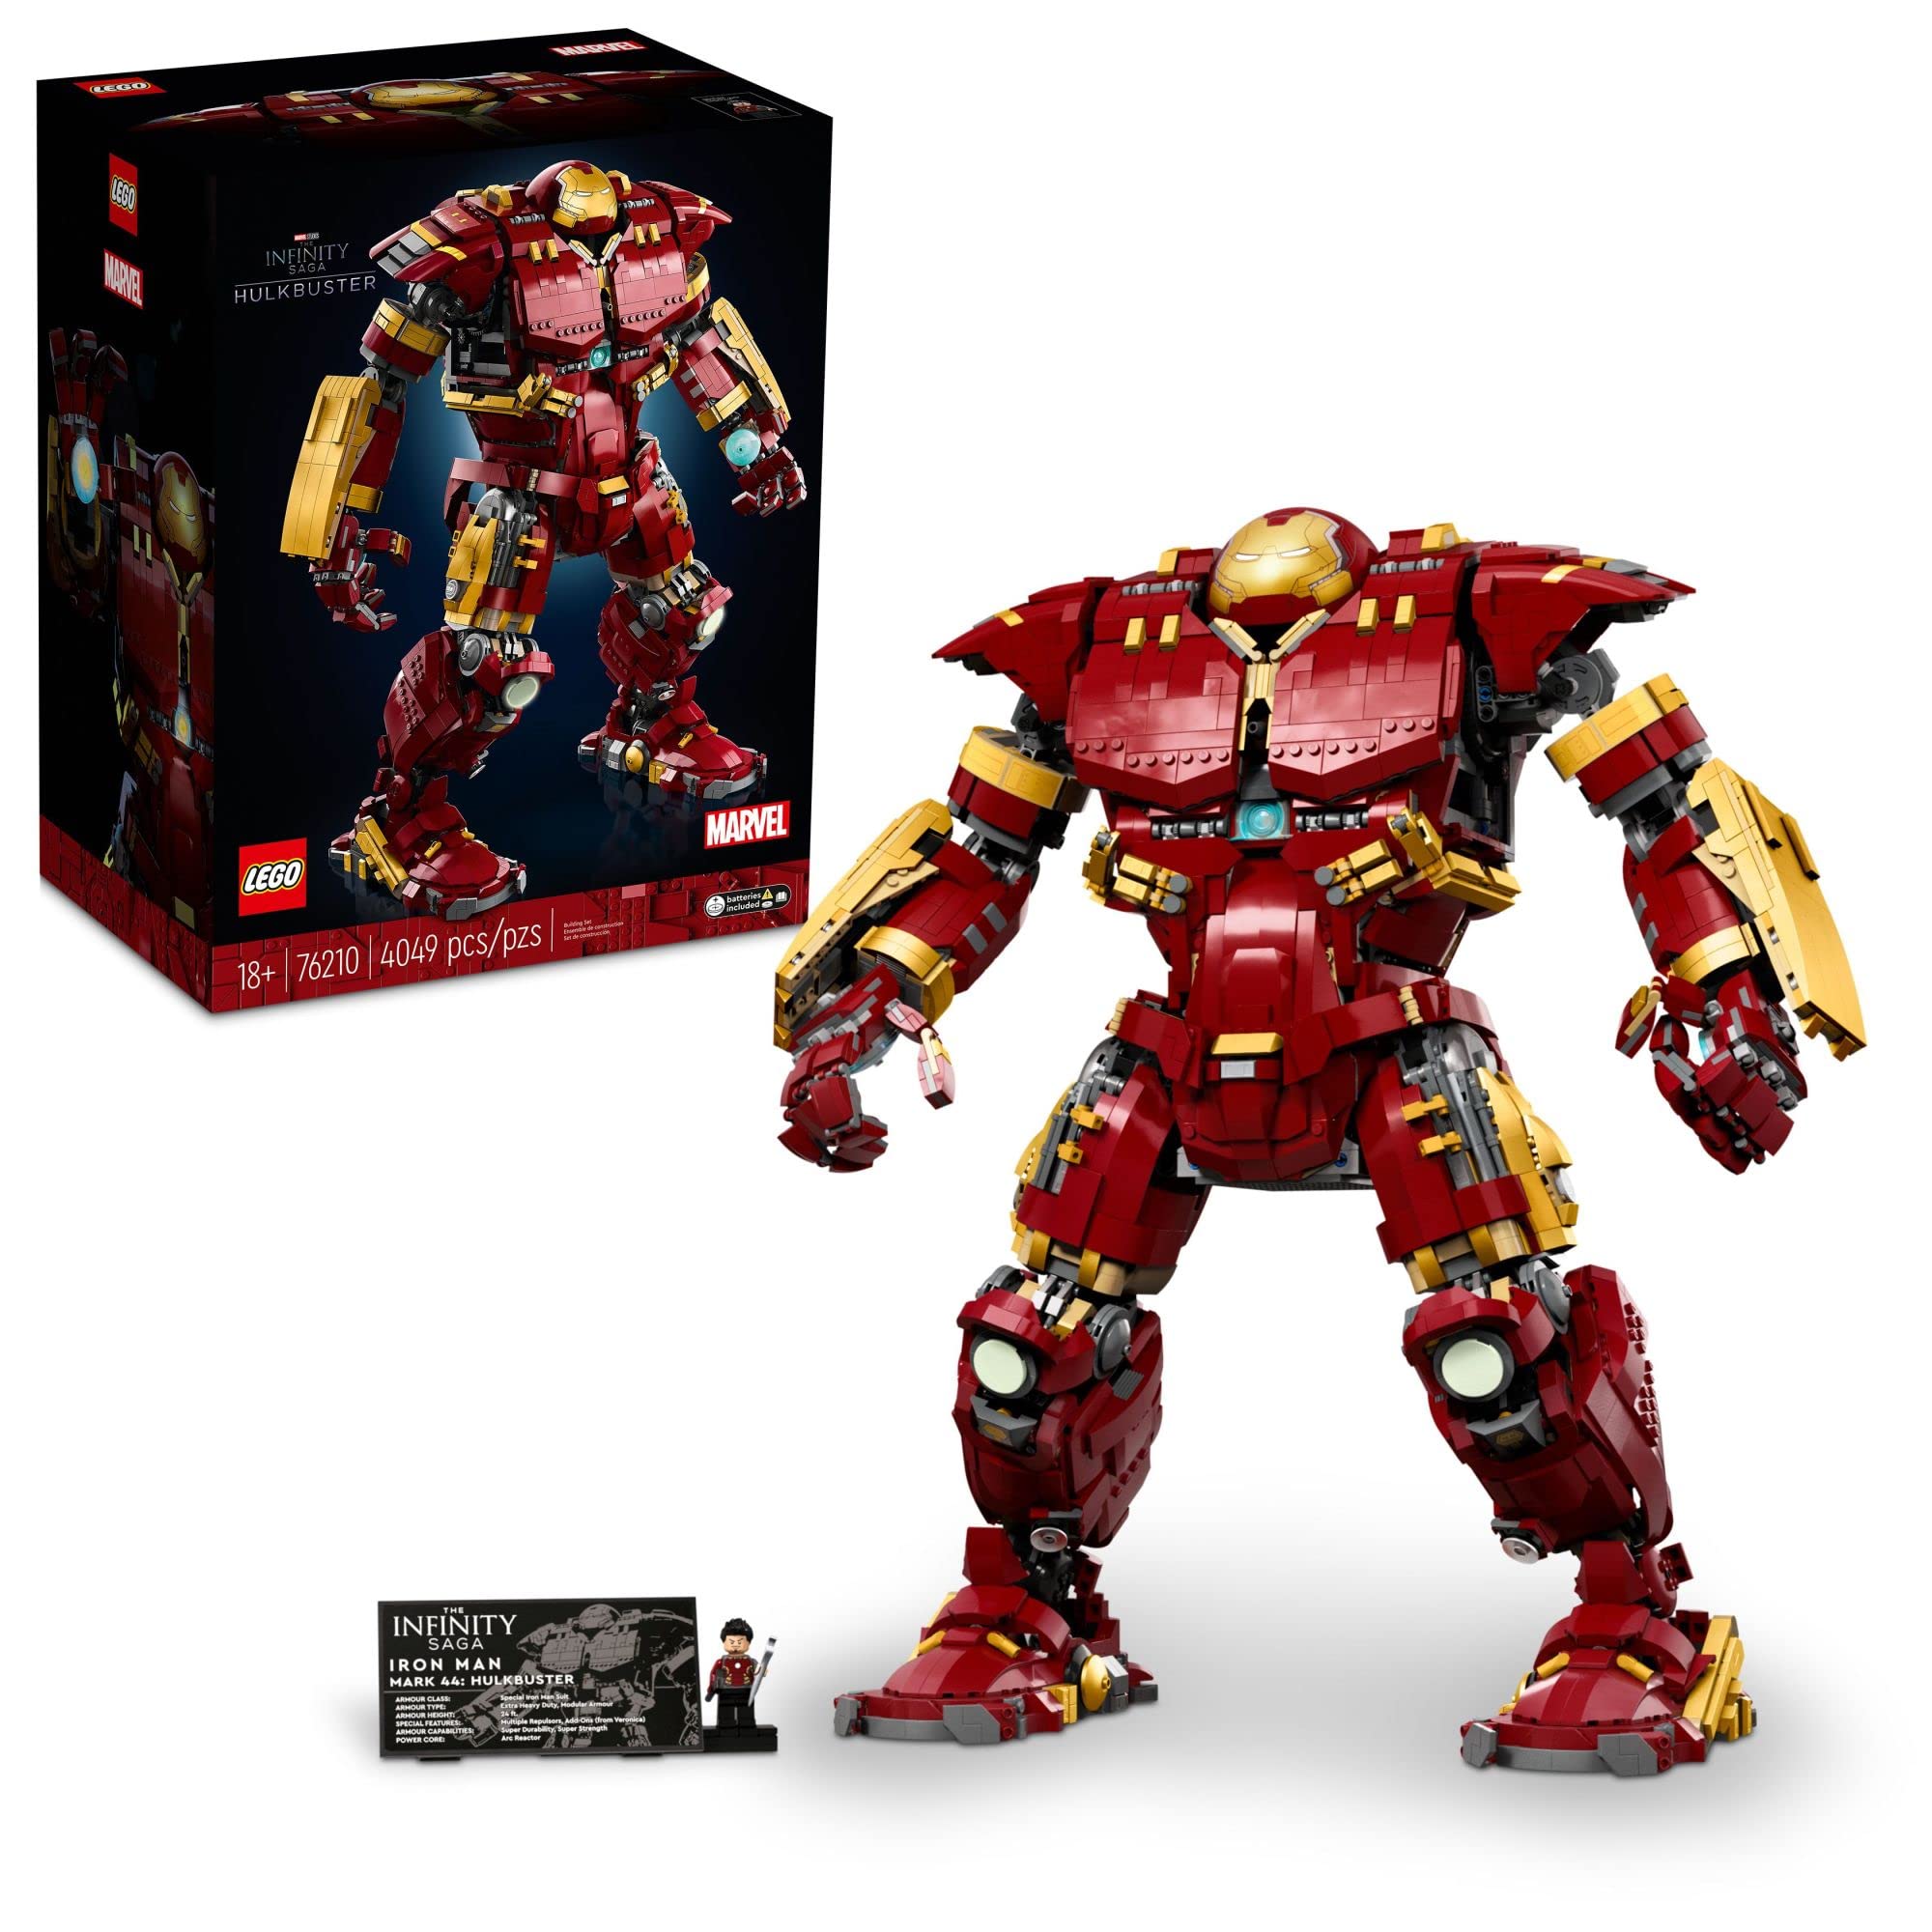 4,049-Piece LEGO Marvel Hulkbuster Building Toy Set w/ 3 Light-Up Arc Reactors, Information Plate, & Tony Start Minifig $326 + Free Shipping